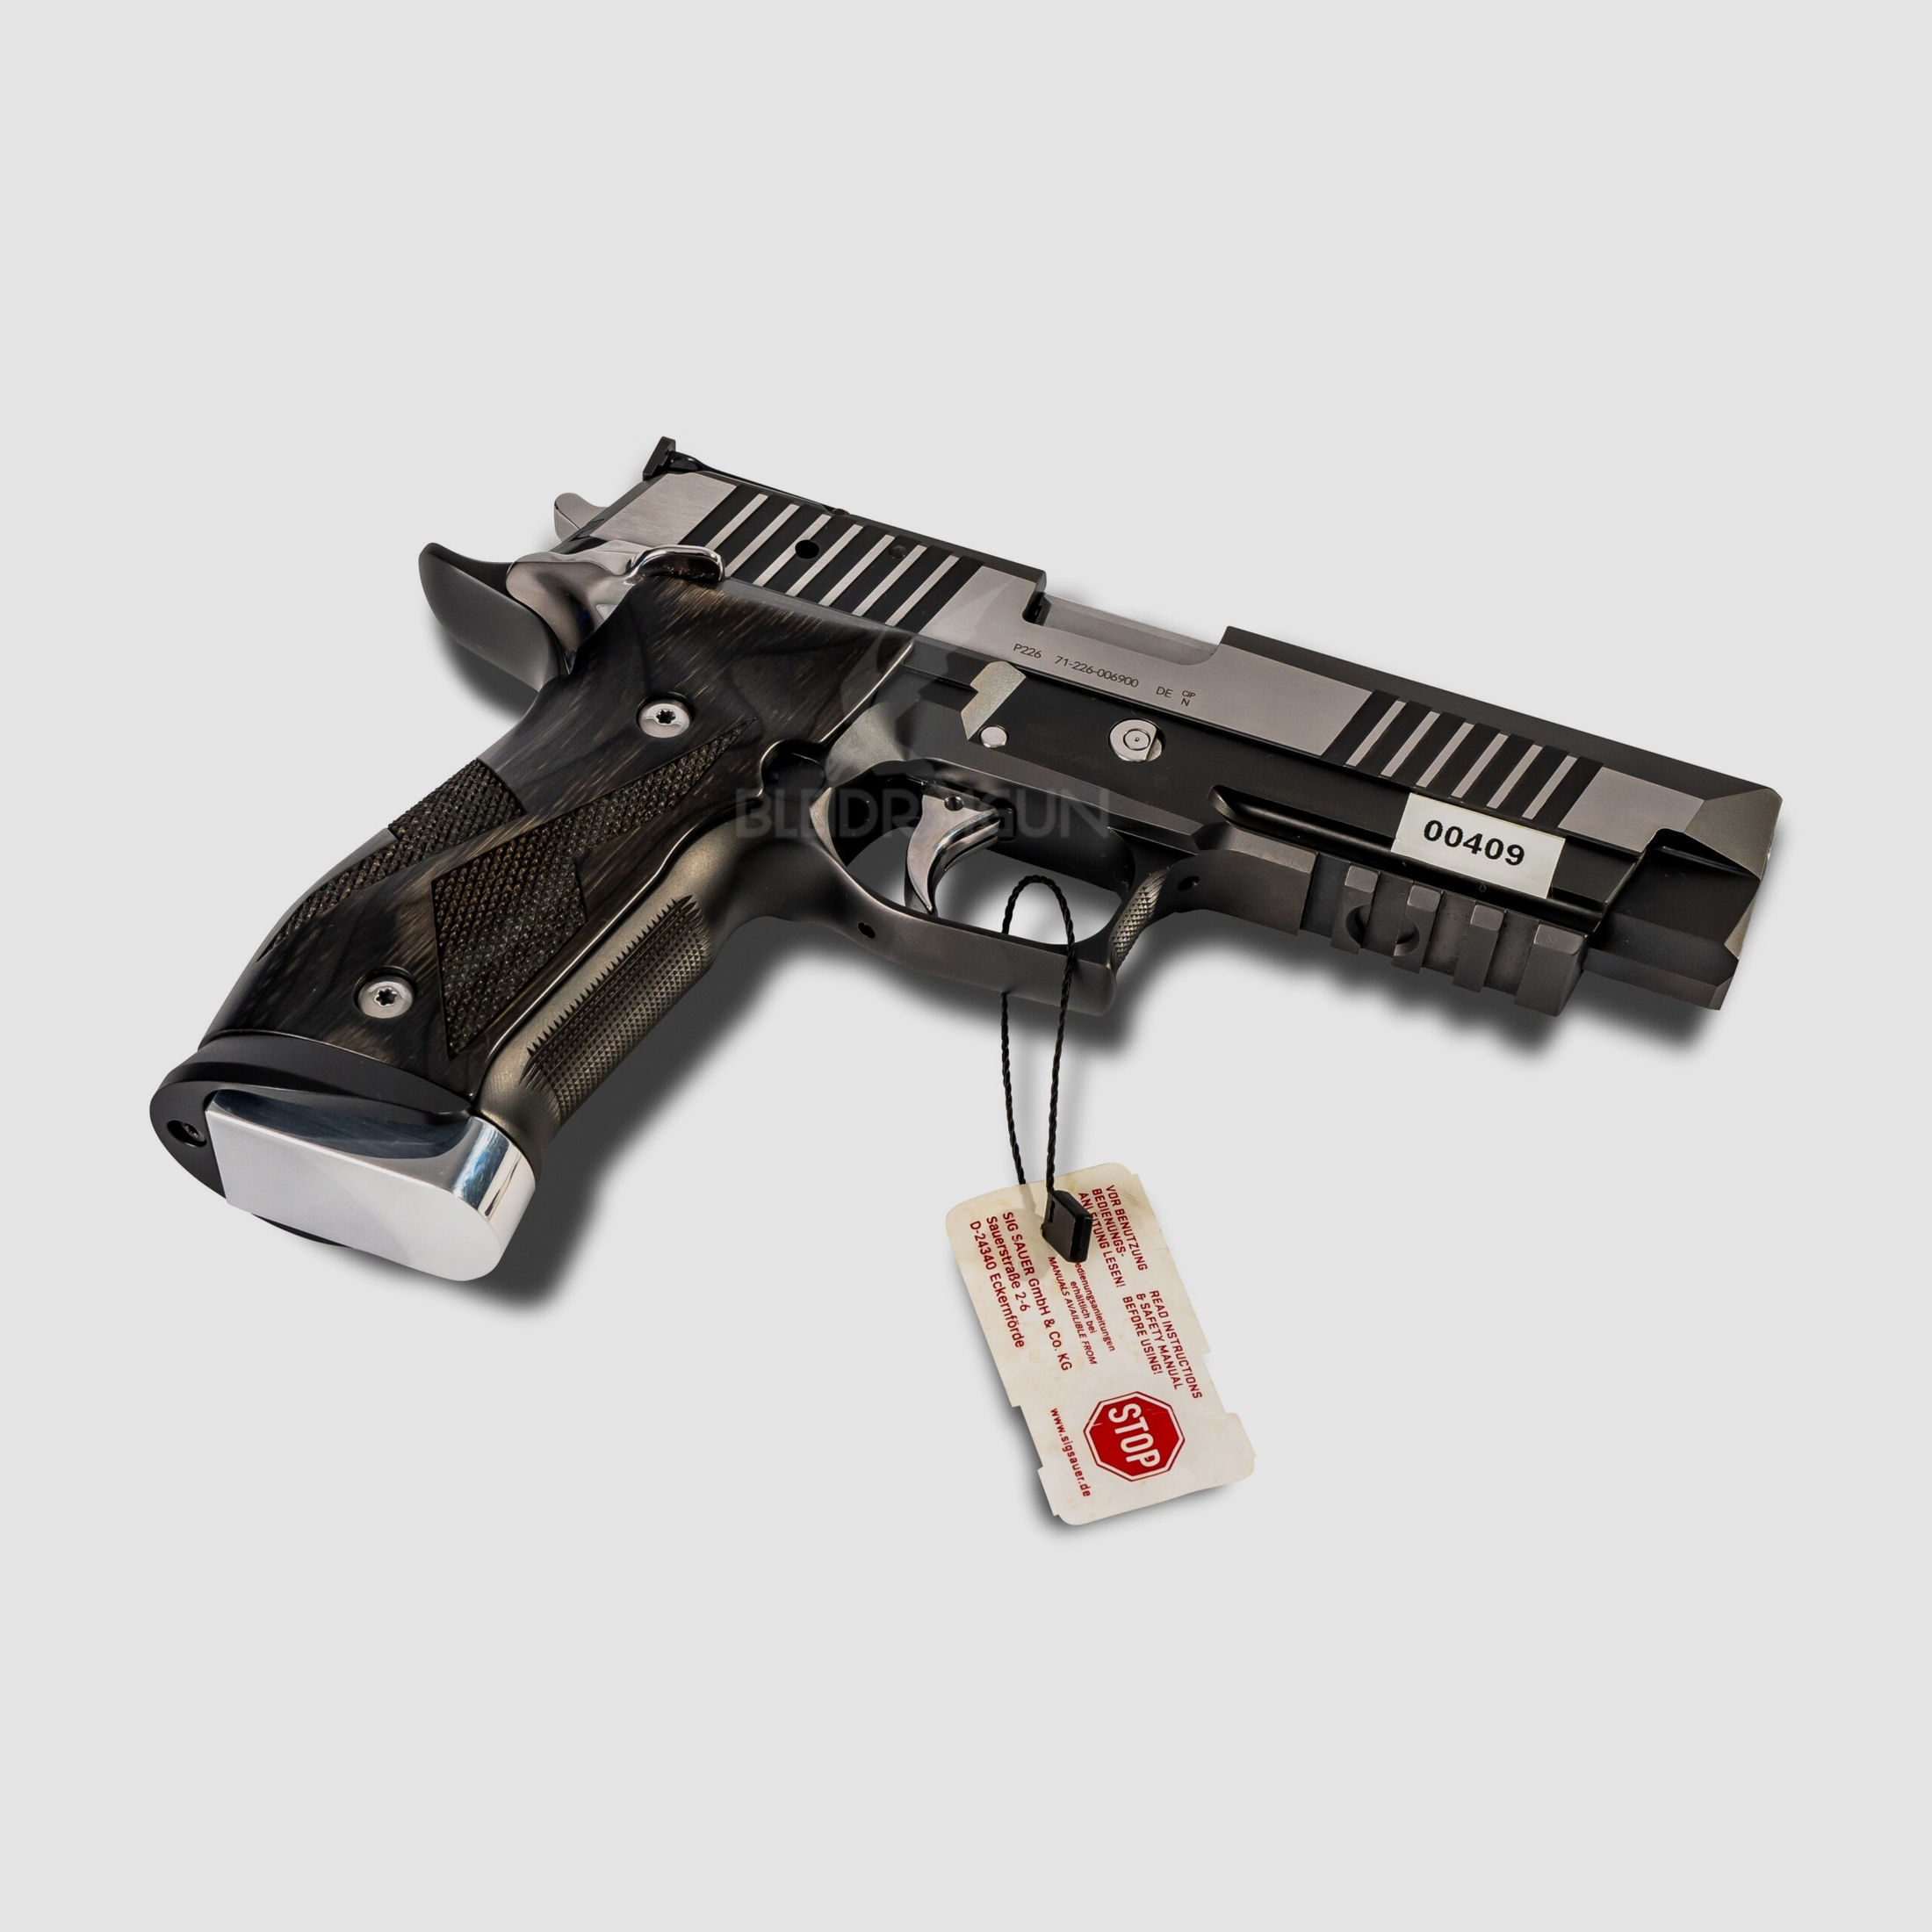 SIG SAUER P226 X-Five Black and White 9mm Luger